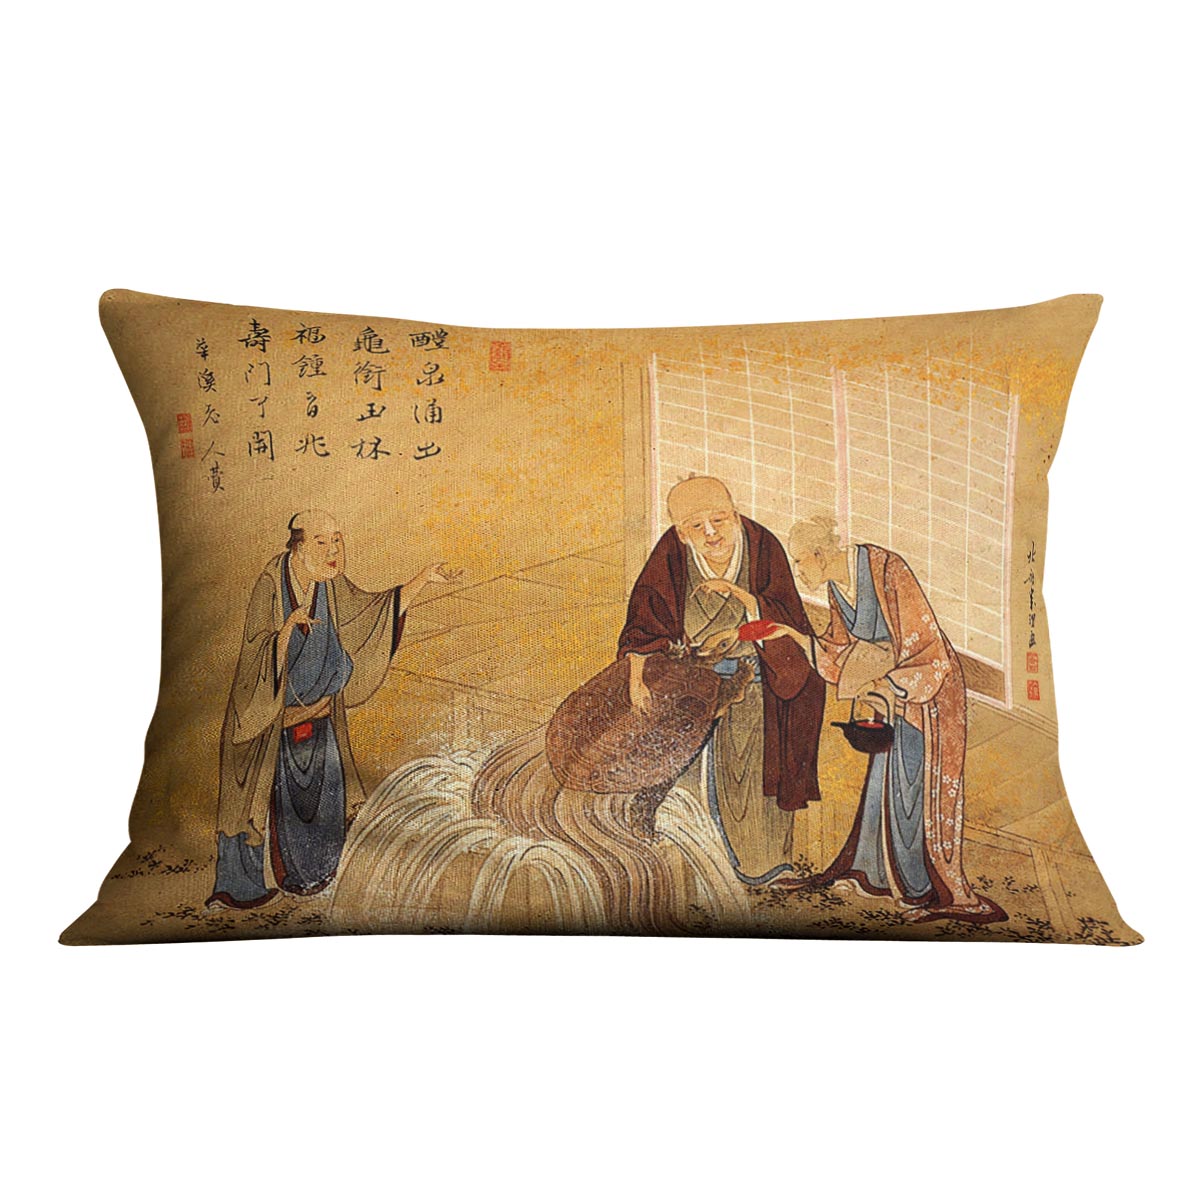 The thouthand years turtle by Hokusai Cushion